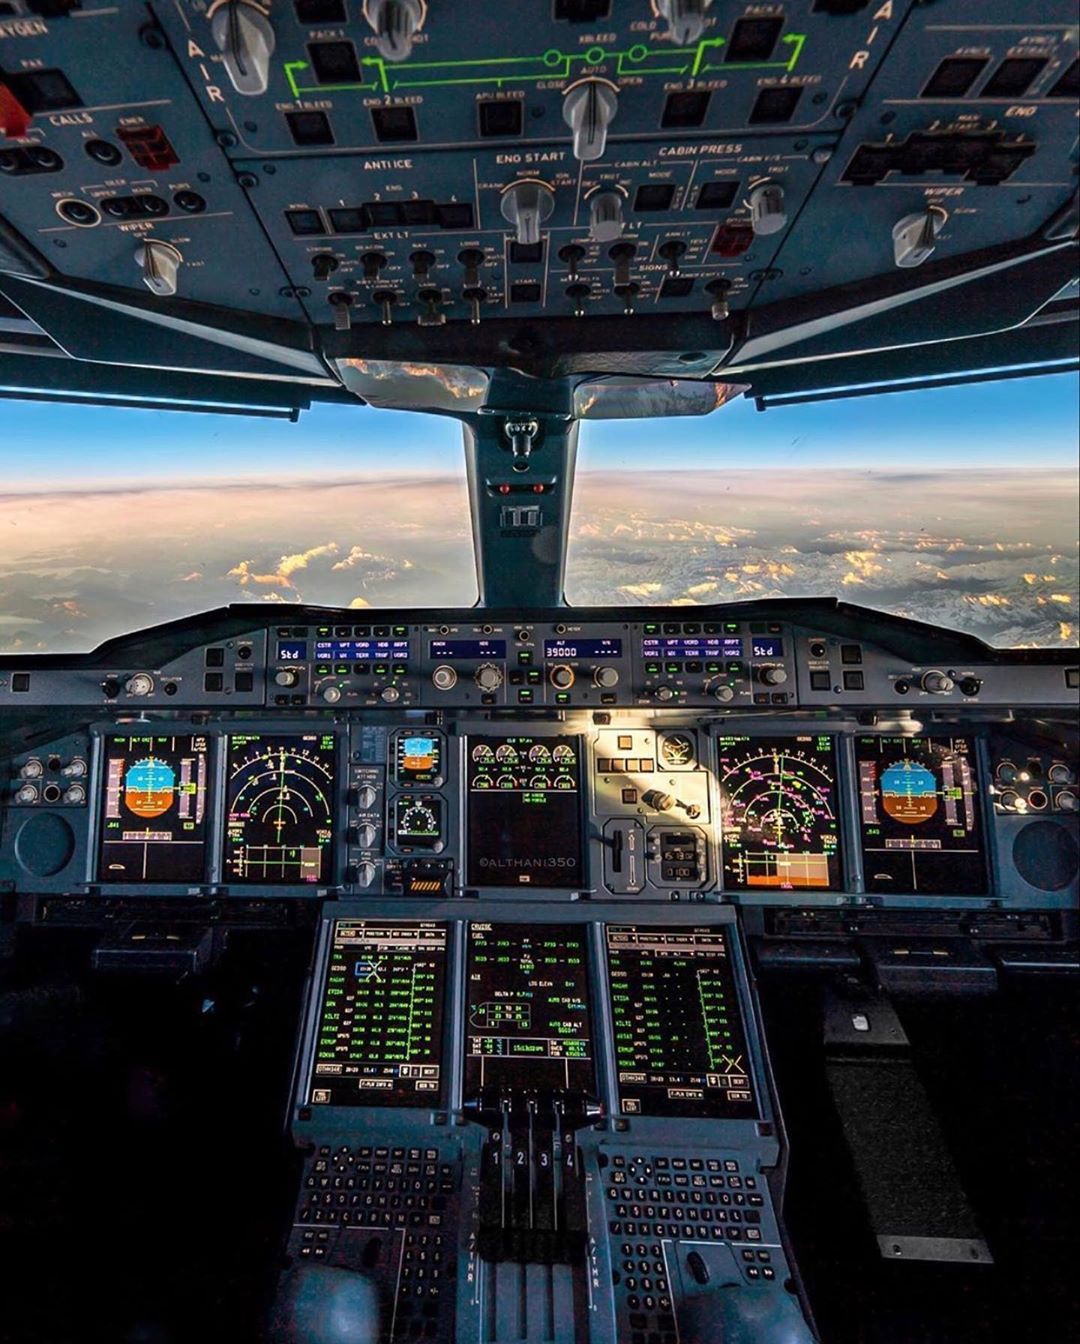 Vikram Kumar (336k) on Instagram: “Looking at the picture can you guess the Destination? Photogr. Airplane wallpaper, Airbus a380 cockpit, Cockpit